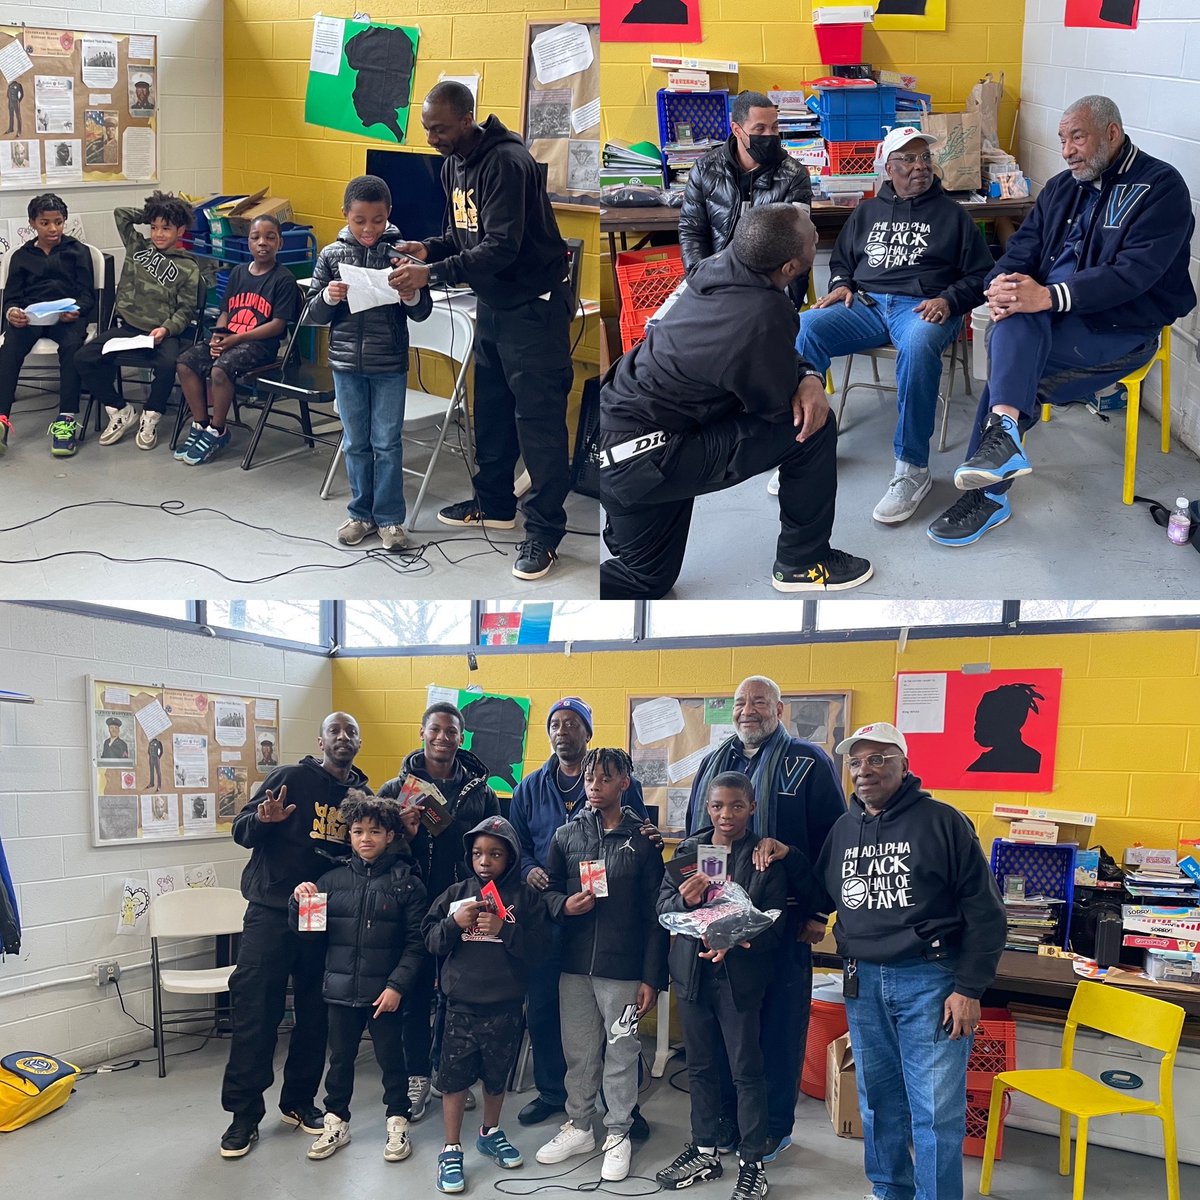 This past Saturday, Smith AC and @coolfabricsllc hosted Black by Nature: A Creative Writing Contest for youth that MTWB was proud to support. 3 winners each got gift certificates and a good time was had by all!